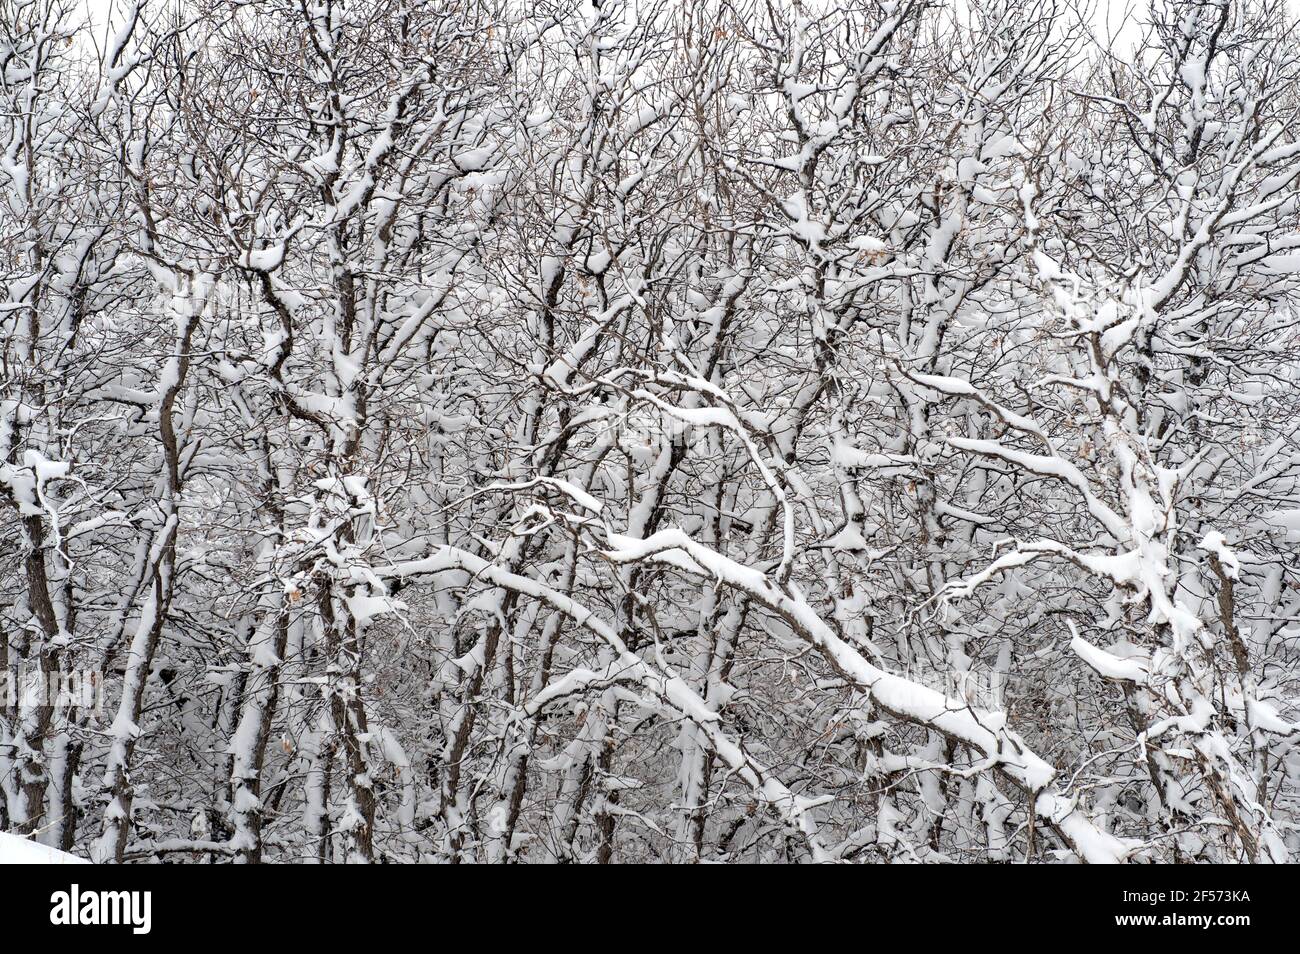 Heavy snow on scrub oak trees, from a late Spring snowstorm in Colorado Springs., Colorado. Stock Photo